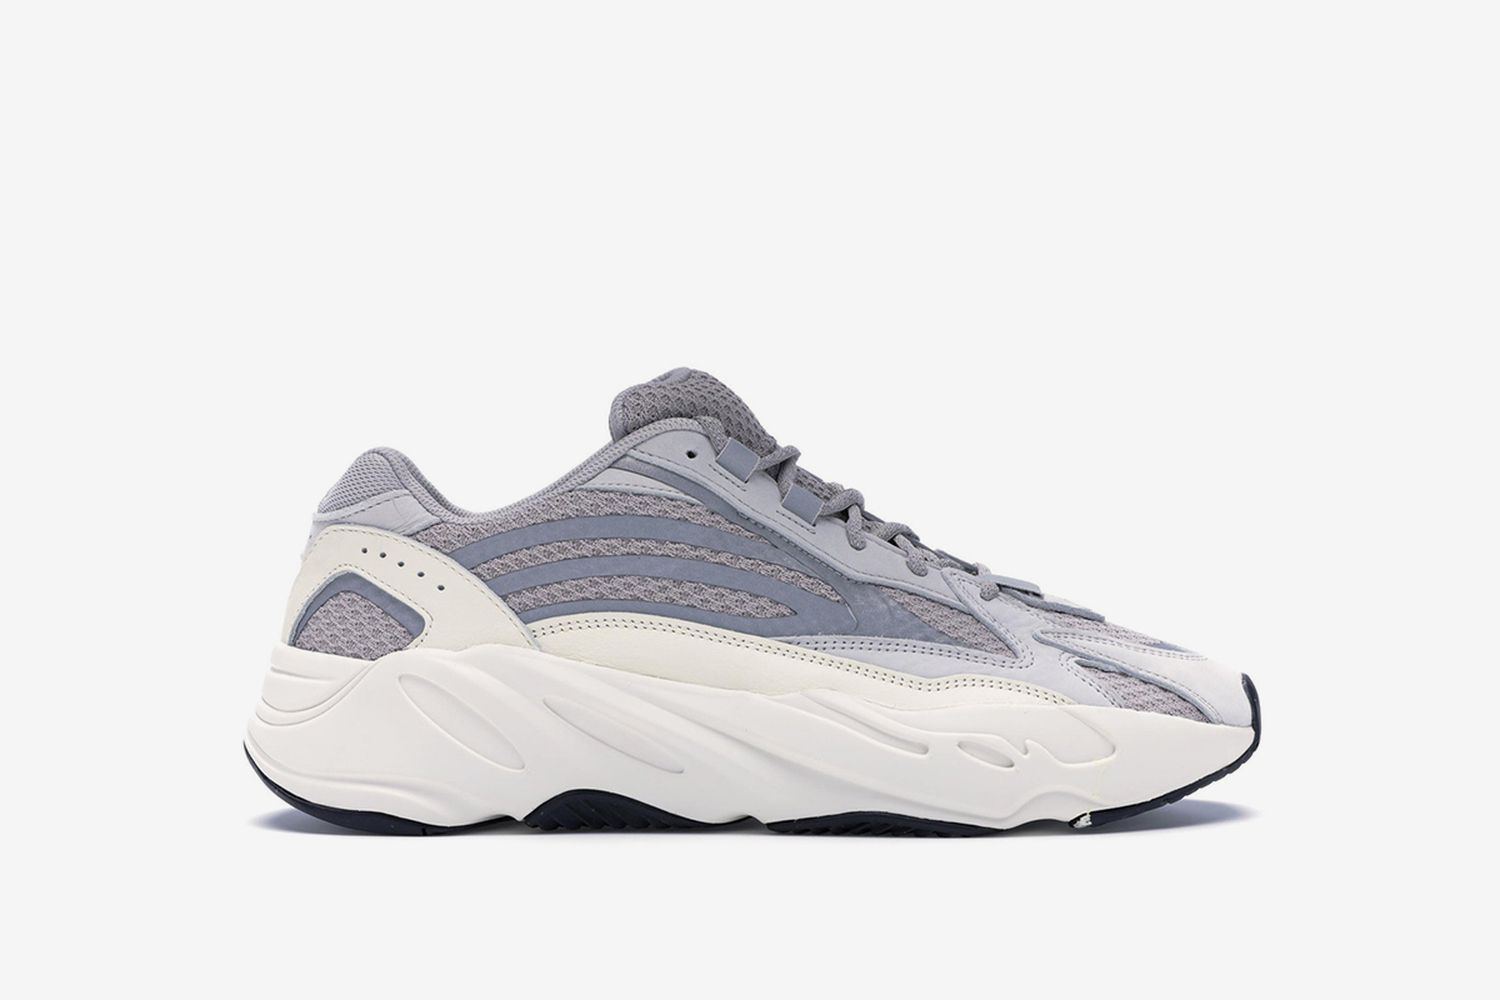 Cop the “Hospital Blue” adidas YEEZY Boost 700 V2 at StockX